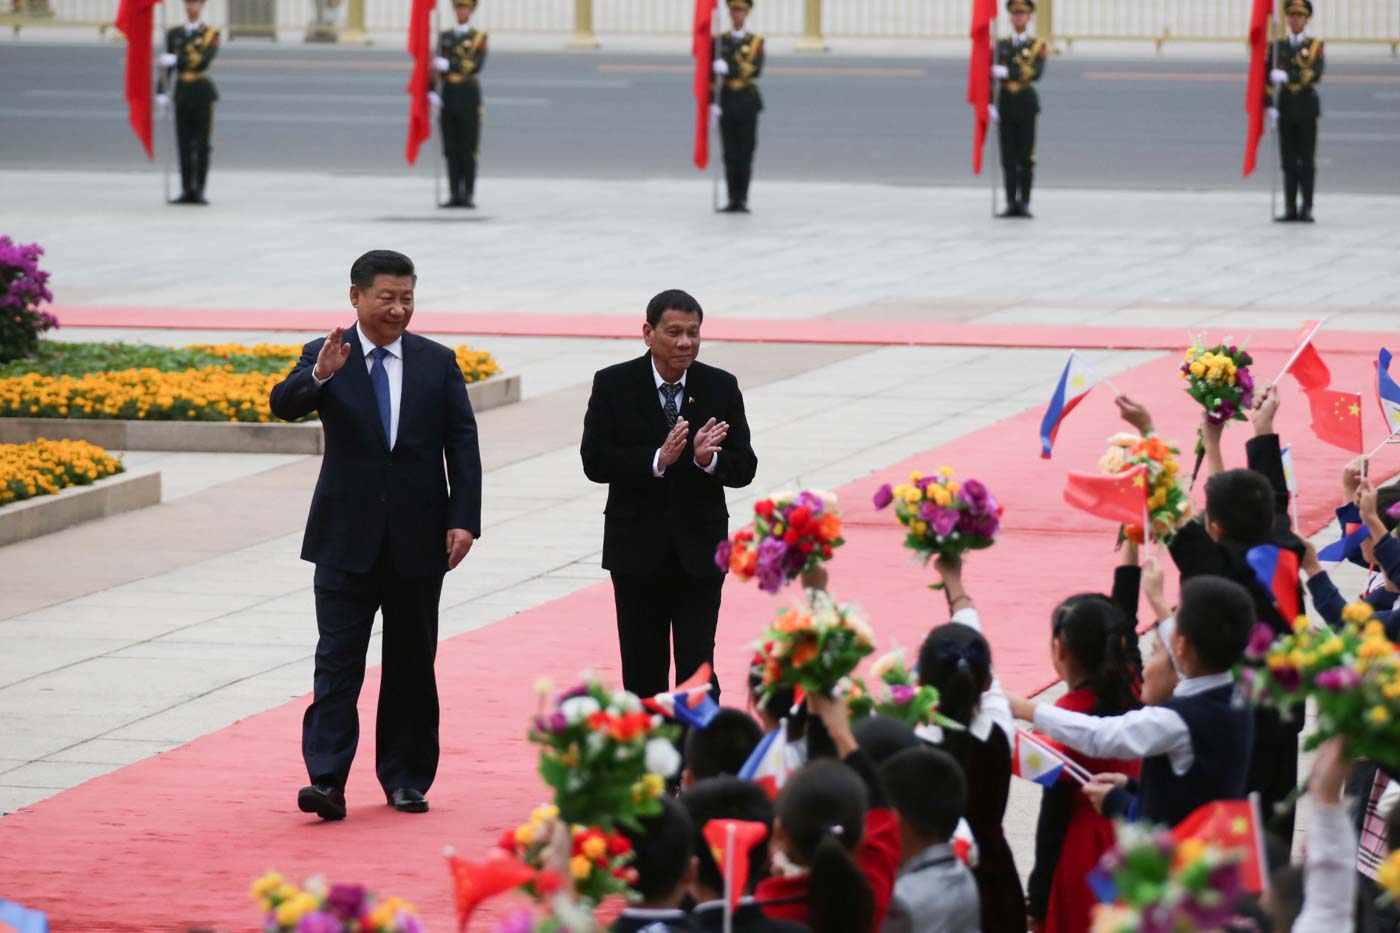 TALKING MARITIME DISPUTE. President Rodrigo Duterte and President Xi Jinping are welcomed by Chinese students during the arrival ceremony at the Great Hall of the People in Beijing on October 20. Photo by King Rodriguez/PPD 